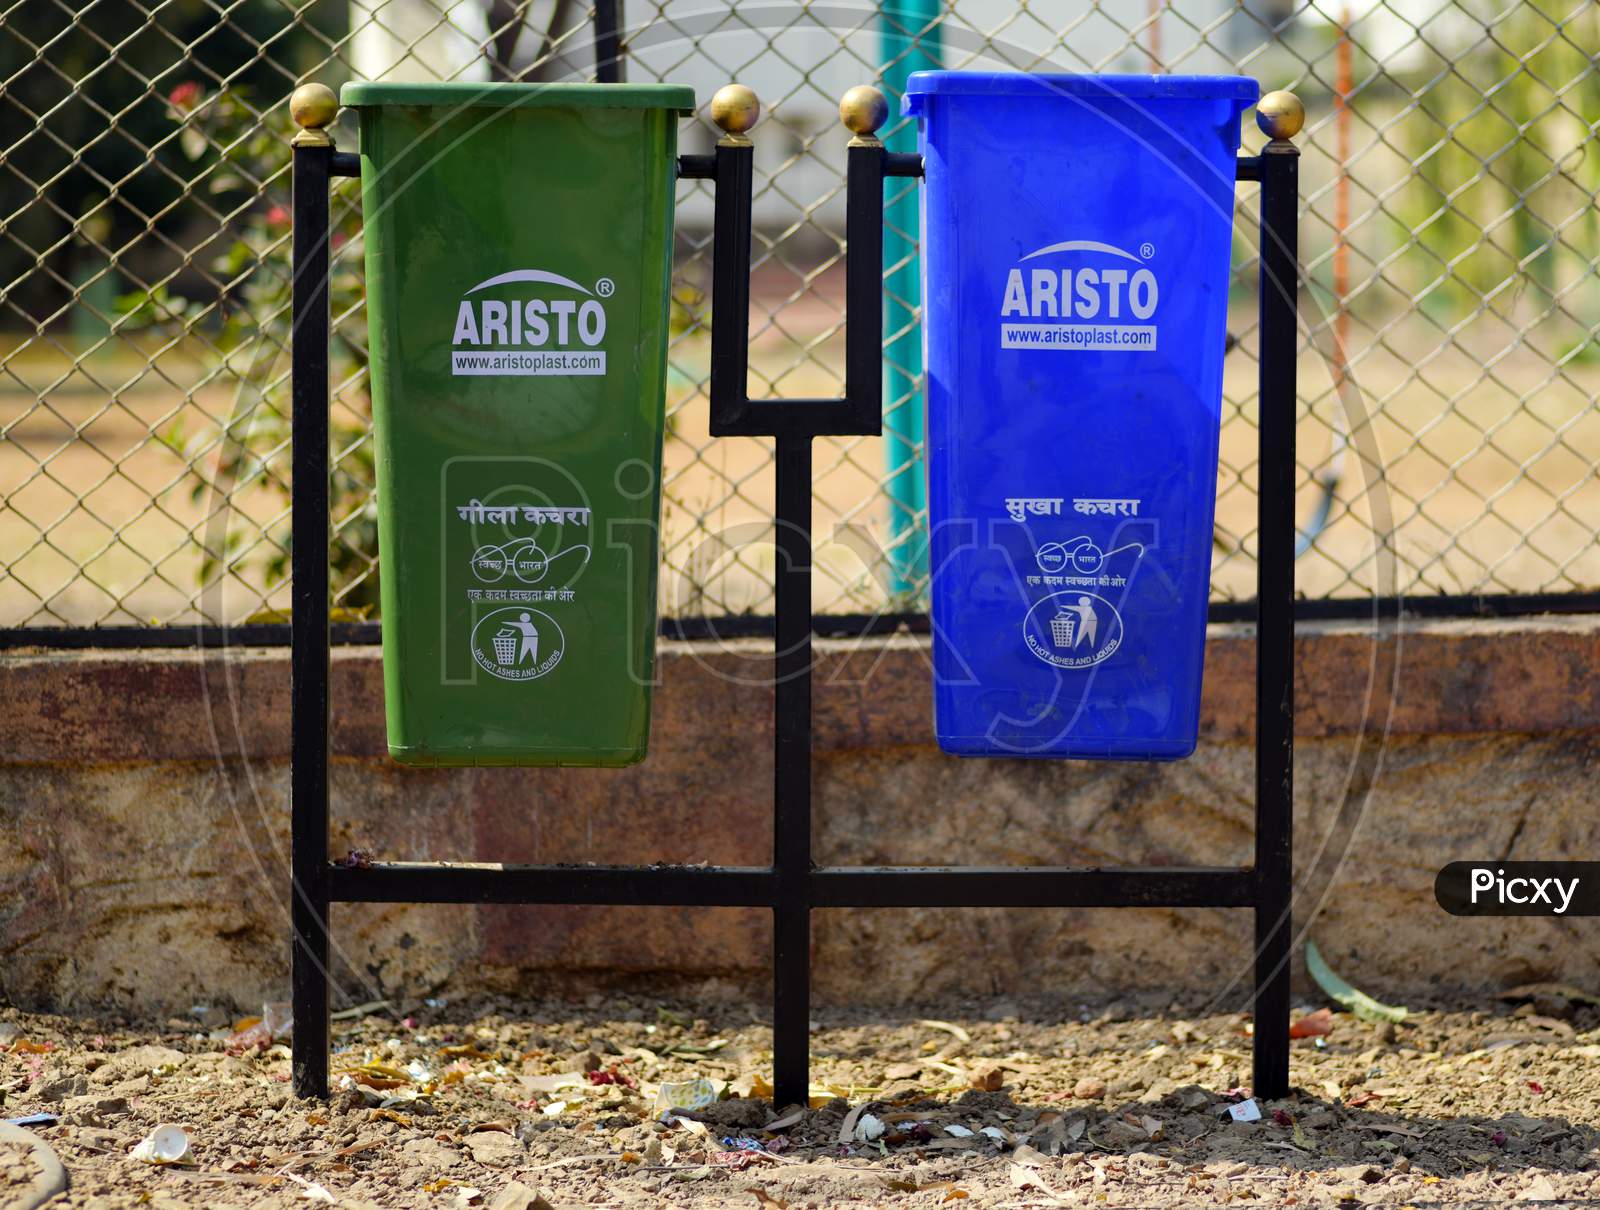 Garbage bins for dry and wet waste segregation